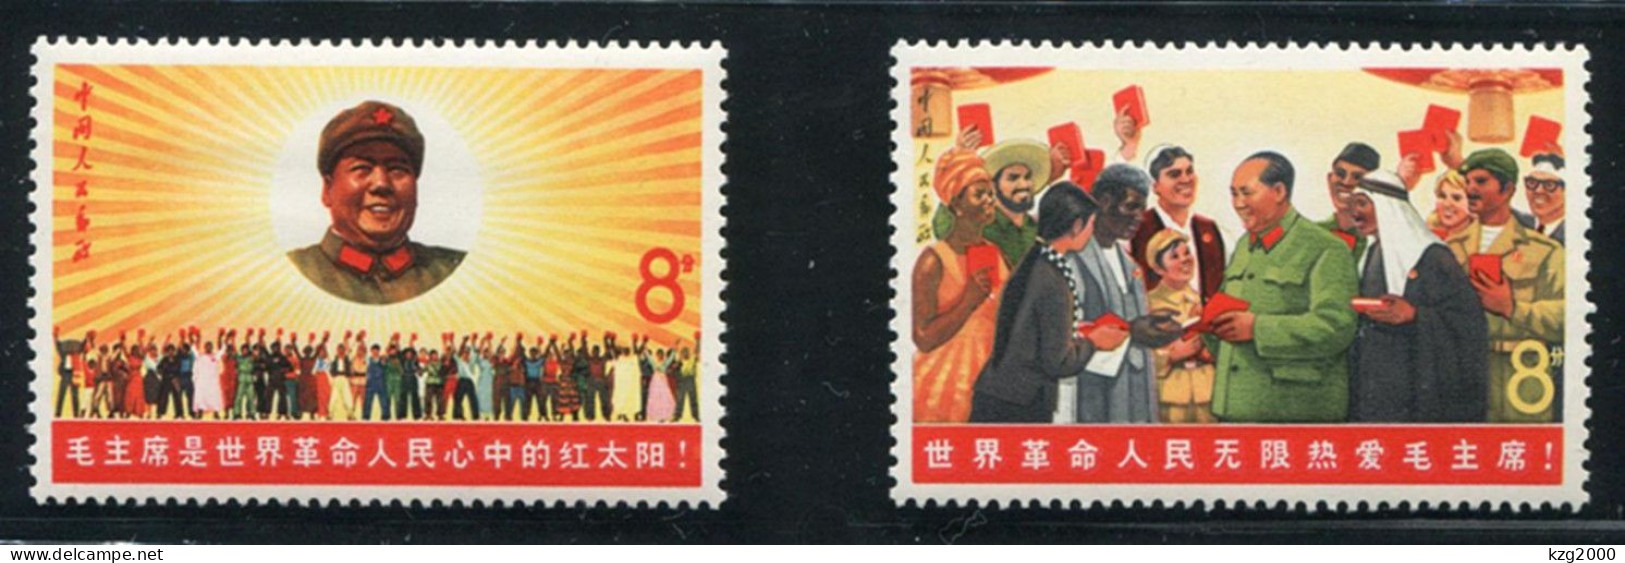 China Stamp 1967 W6  Chairman Mao  With People Of The World  OG Stamps - Neufs